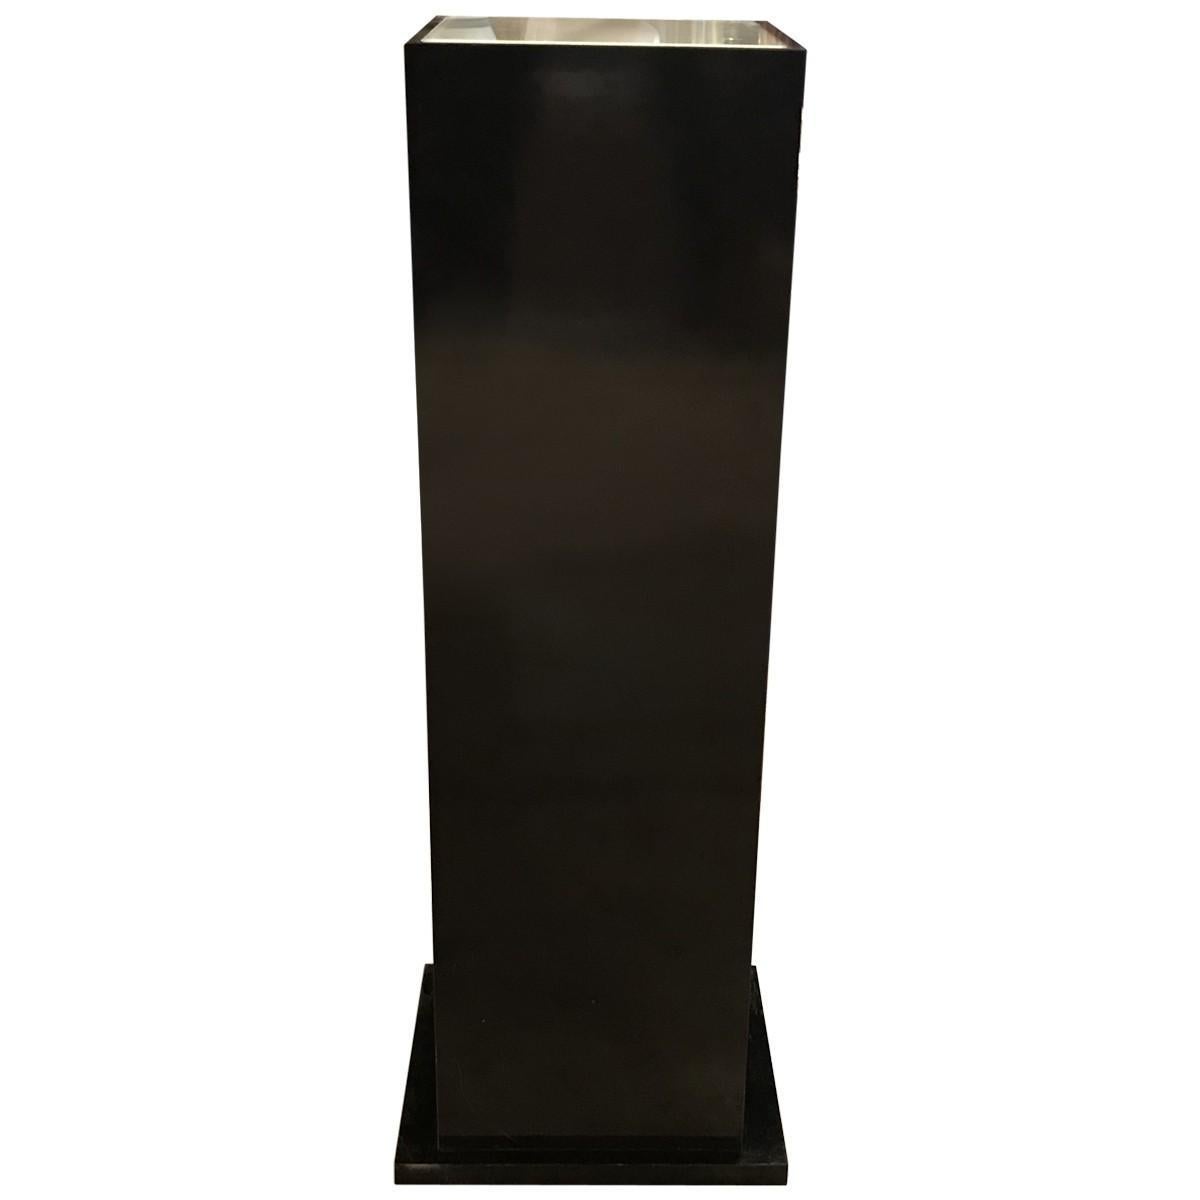 Late 20th Century Contemporary Modern Lacquered Wood Lighted Pedestals For Sale